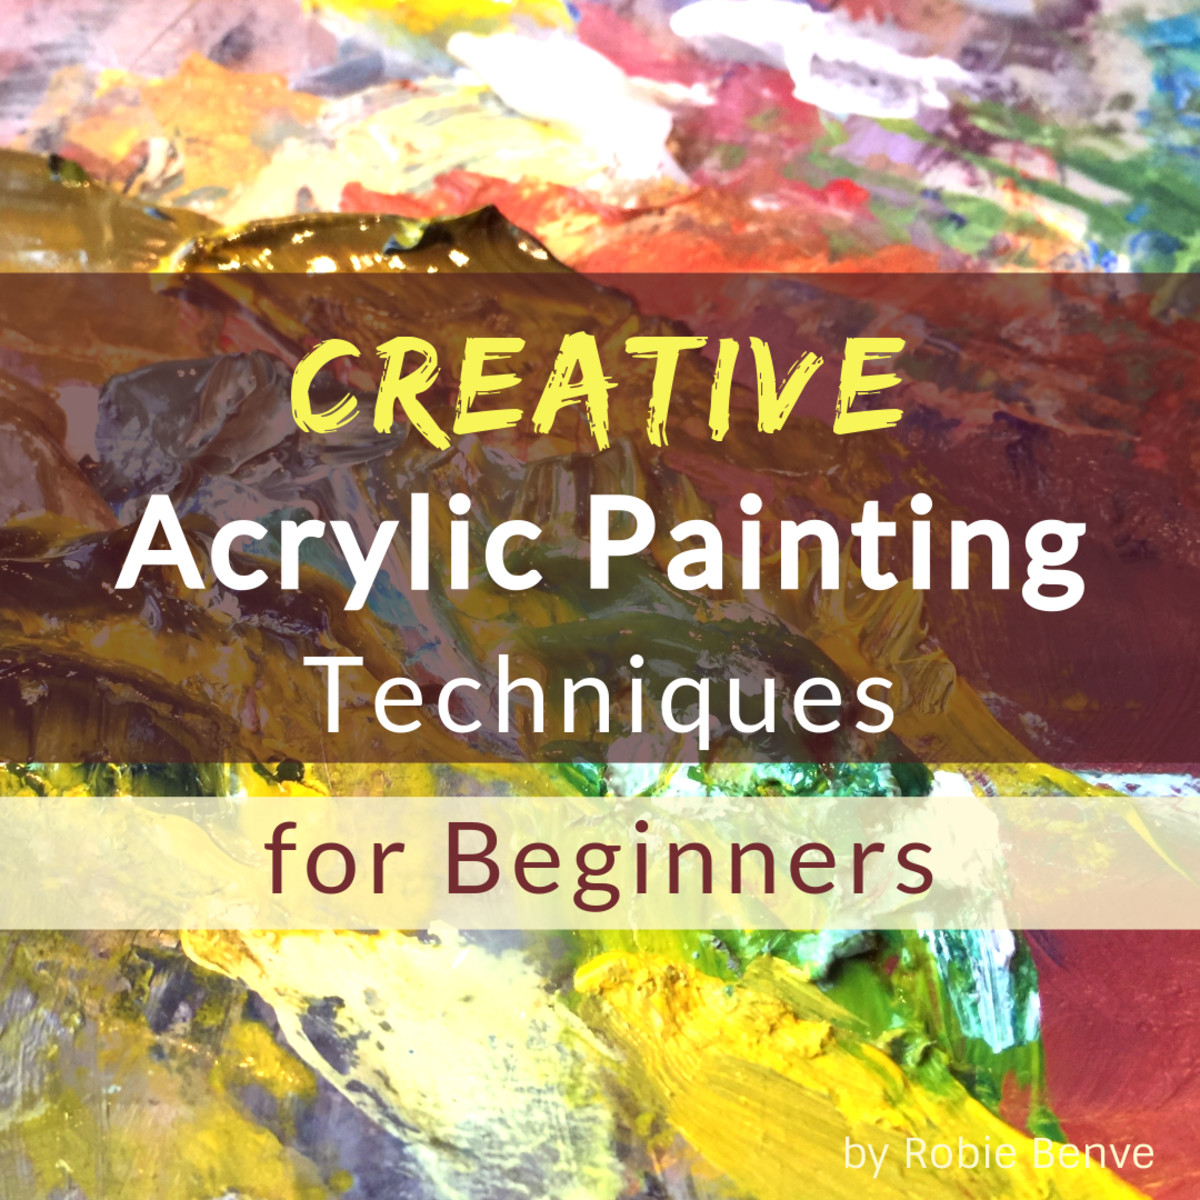 8 Creative Acrylic Painting Techniques